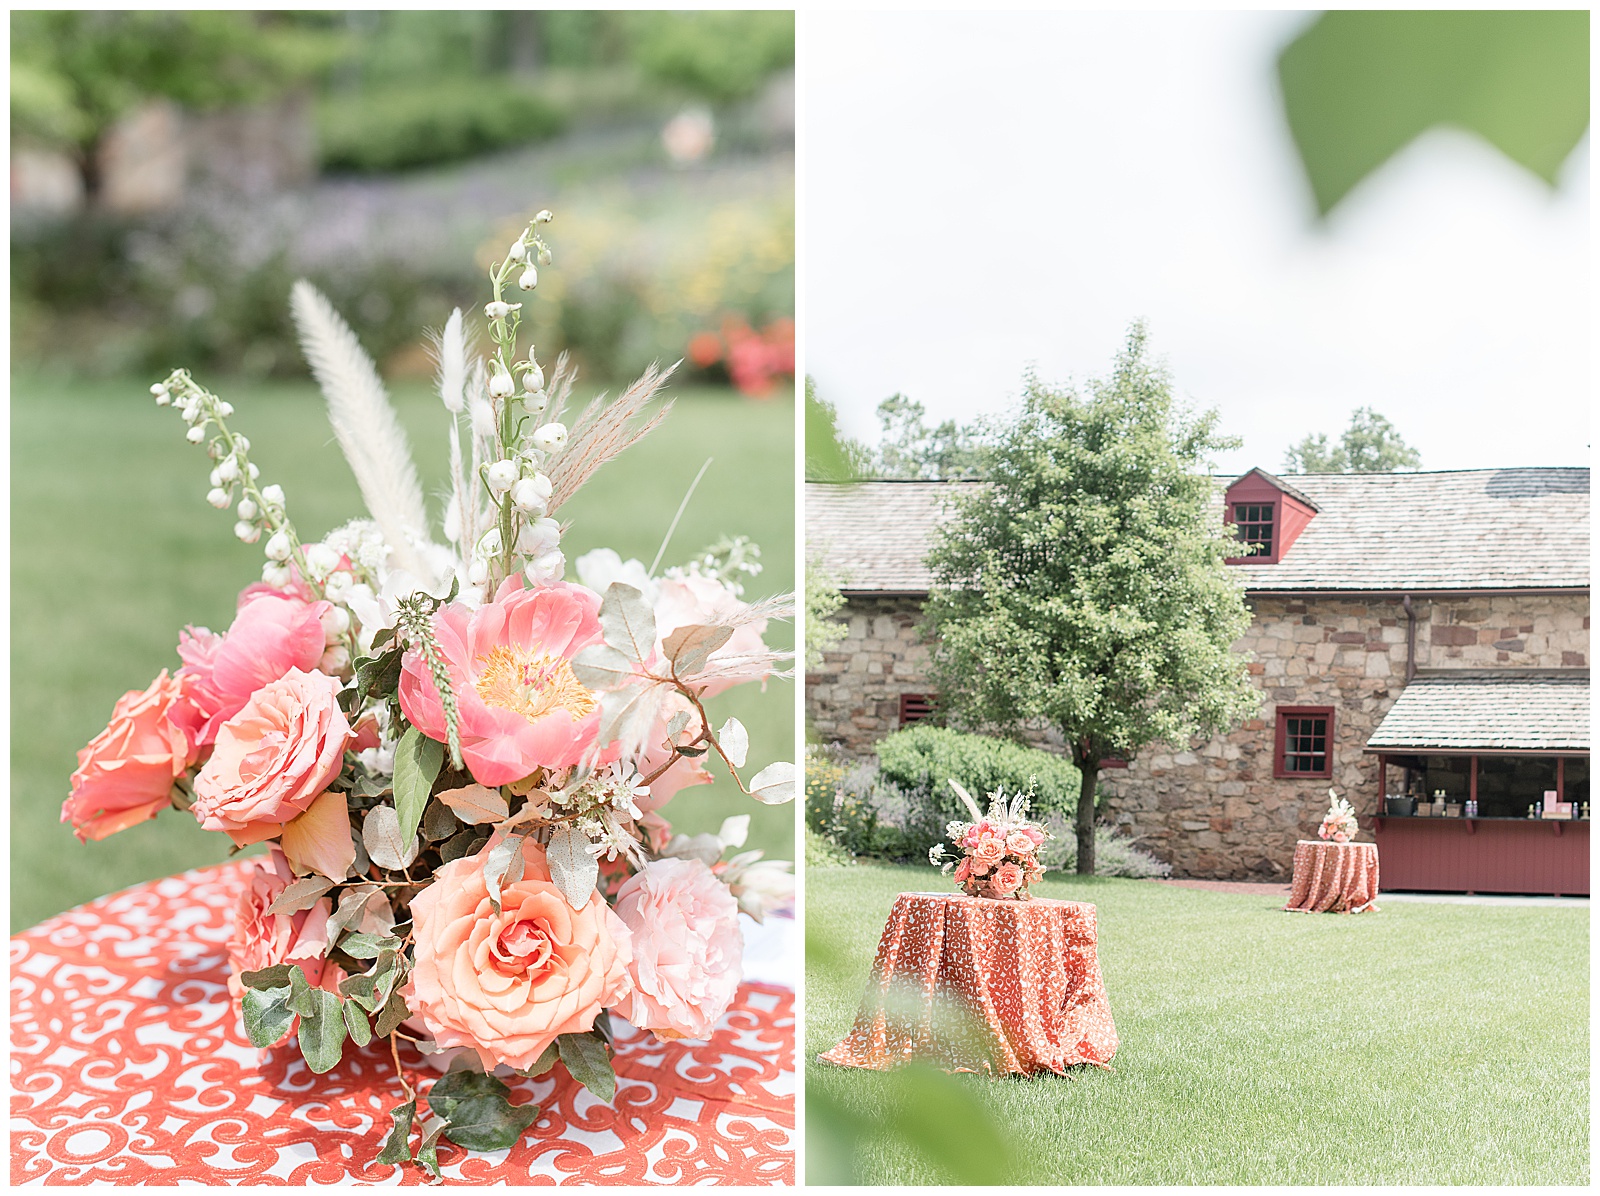 beautiful coral and white flower arrangements on tables topped with coral tablecloths in lawn area by historic barn